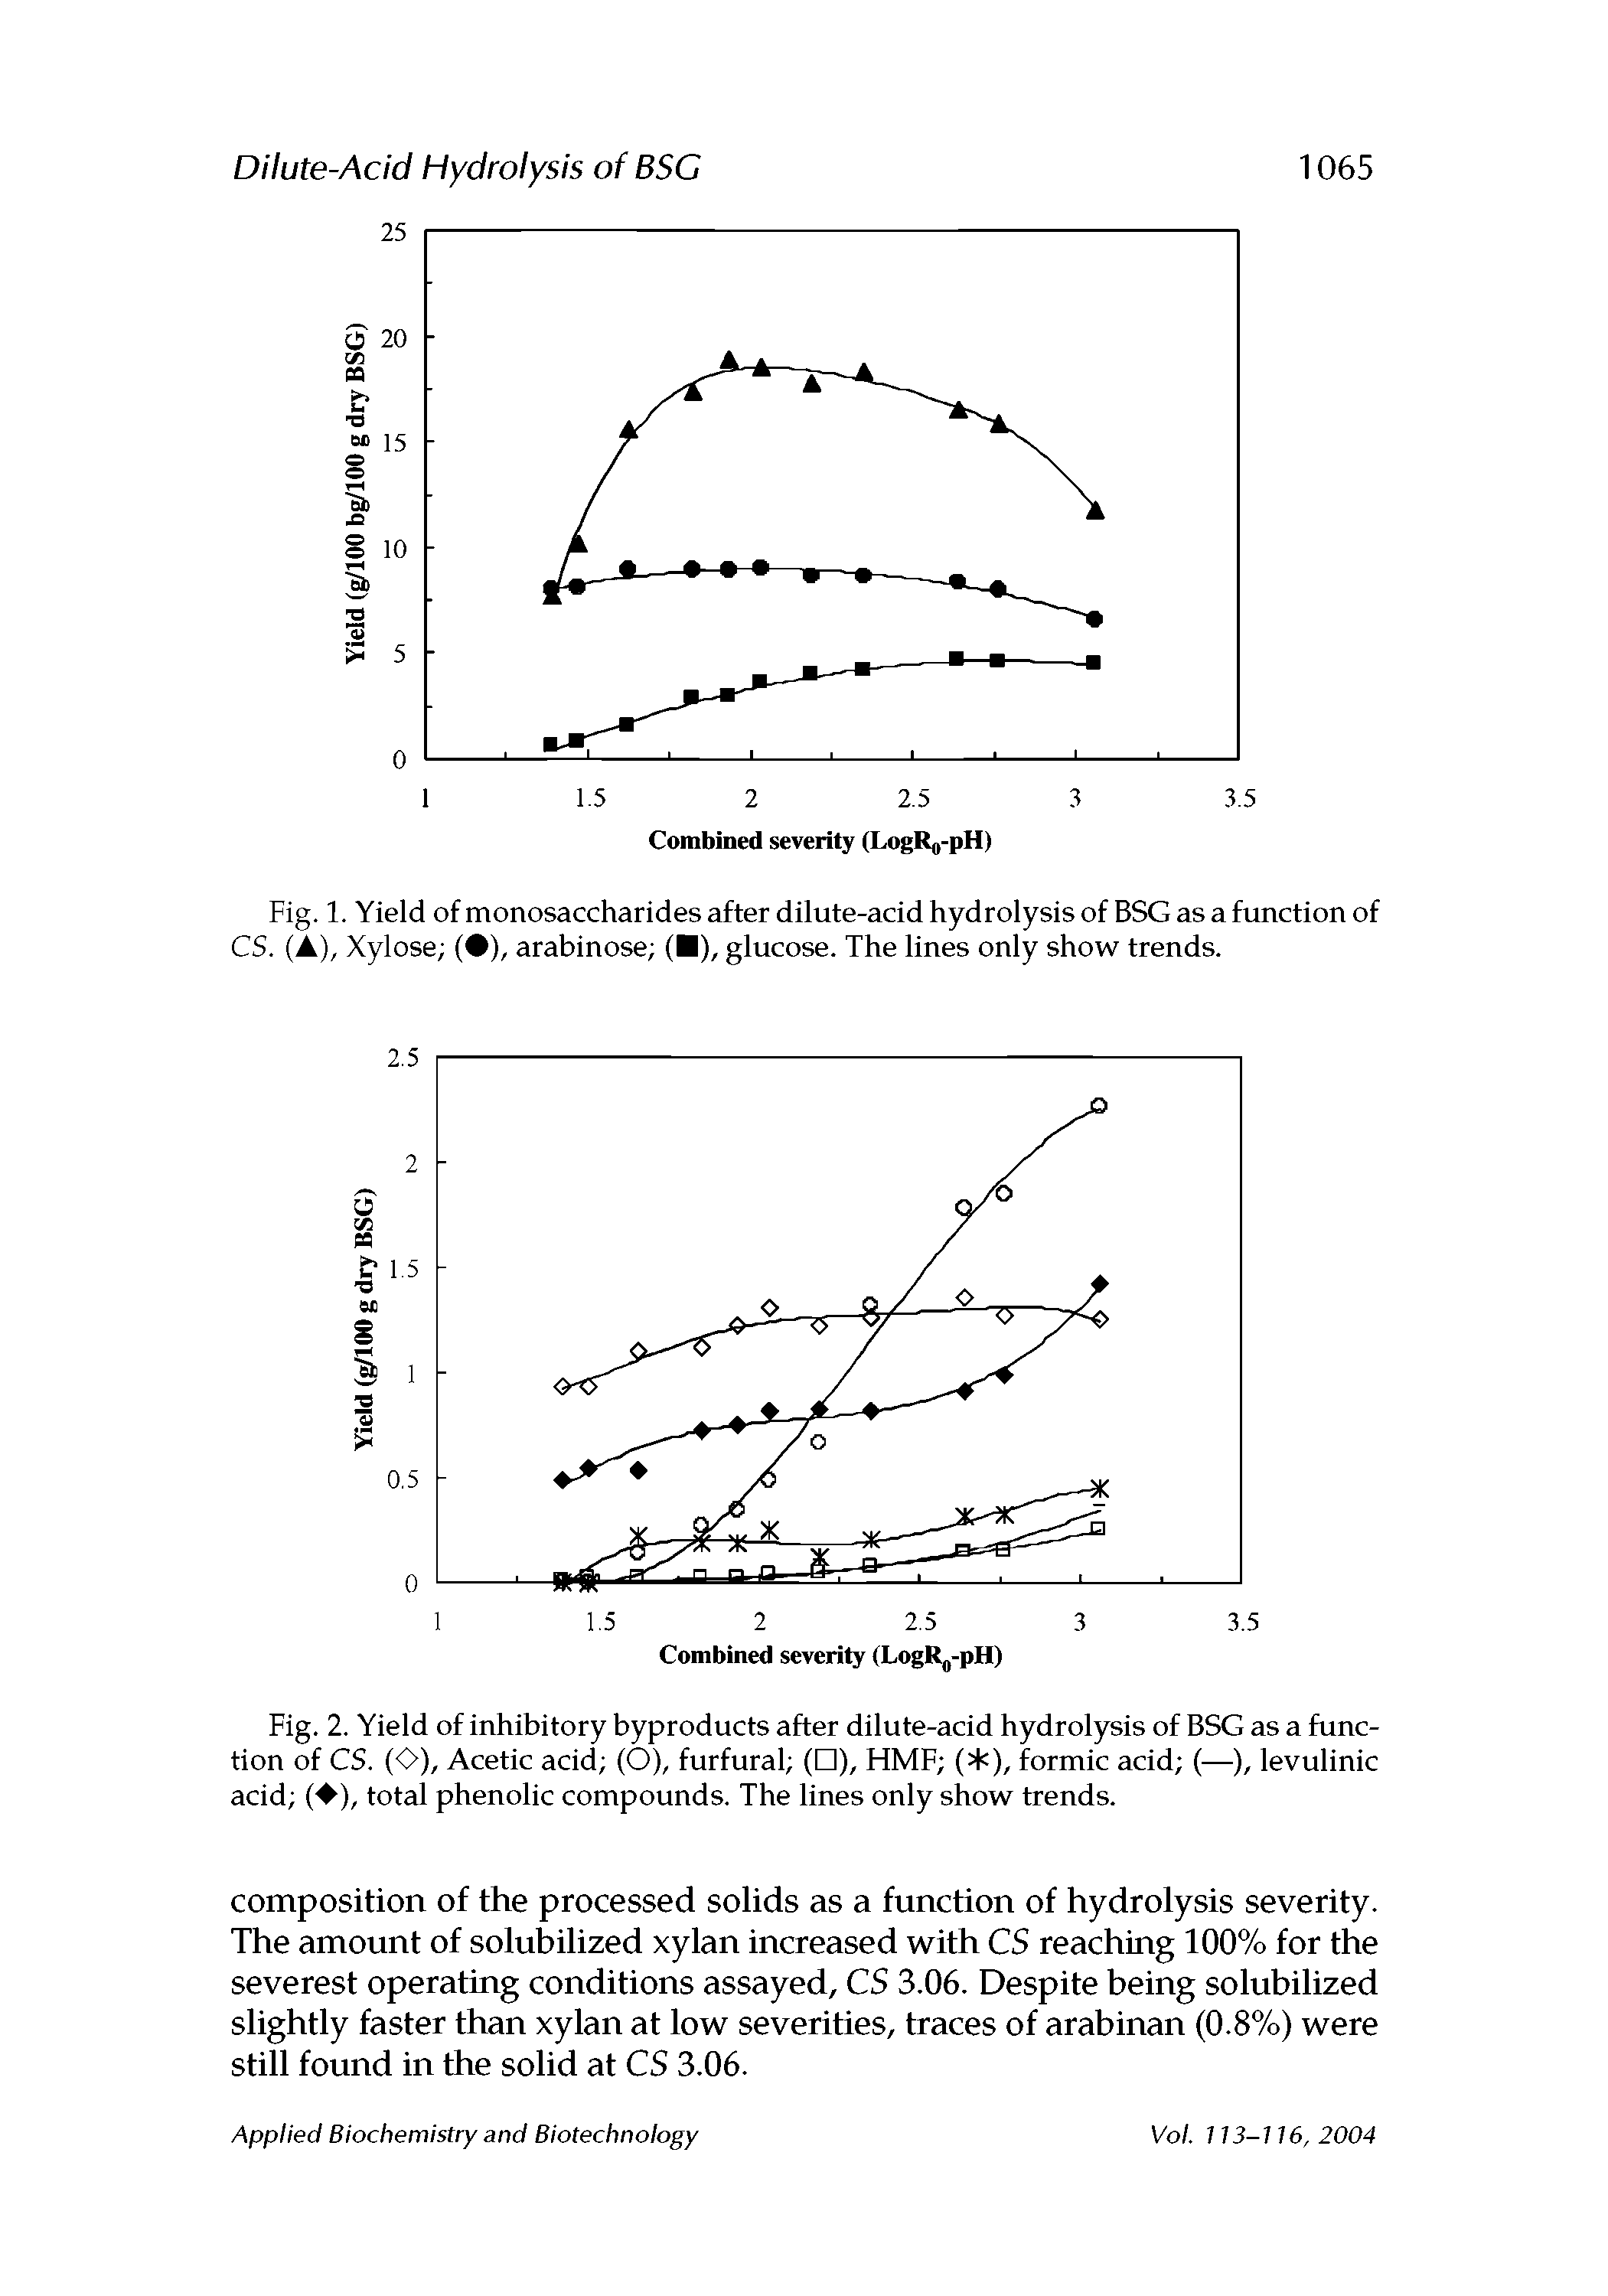 Fig. 2. Yield of inhibitory byproducts after dilute-acid hydrolysis of BSG as a function of CS. (O), Acetic acid (O), furfural ( ), HMF ( ), formic acid (—), levulinic acid ( ), total phenolic compounds. The lines only show trends.